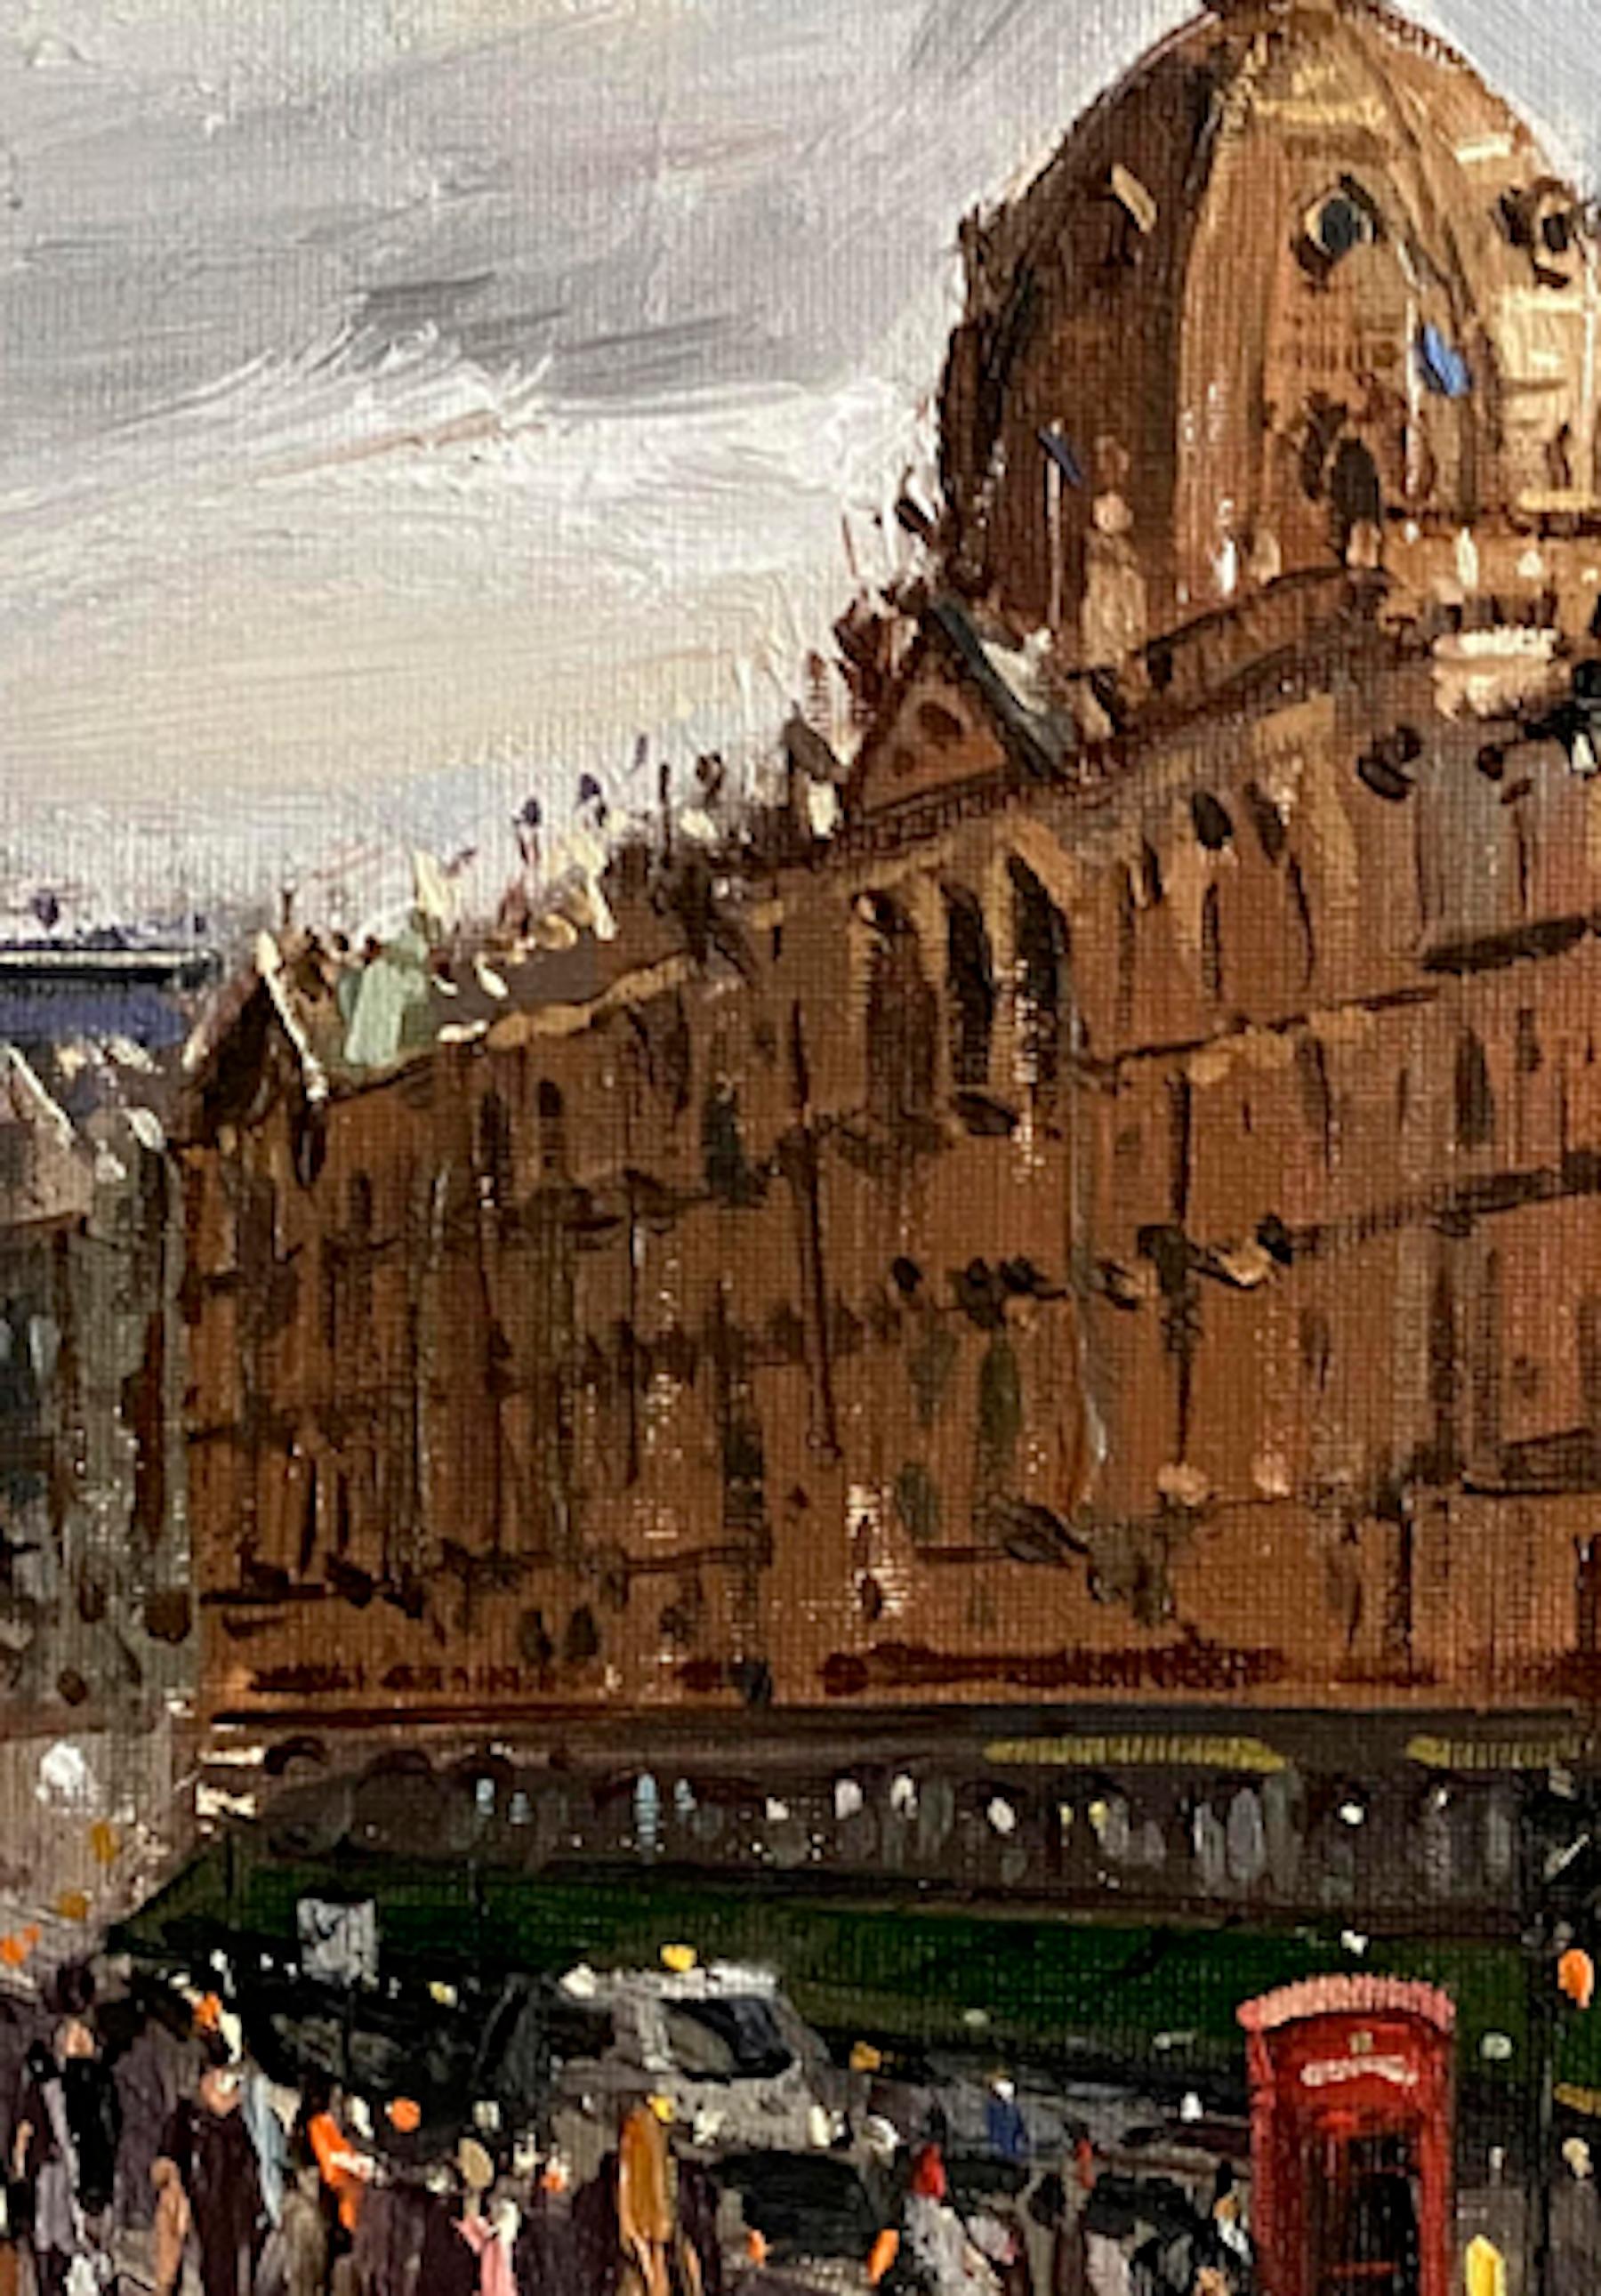 Harrods View painted Plein Air All Prima.
Discover new works by Tushar Sabale available to buy online and in our art gallery at Wychwood Art. Tushar Sabale is an award-winning, Indian born, British artist who paints en plein air as well as in his